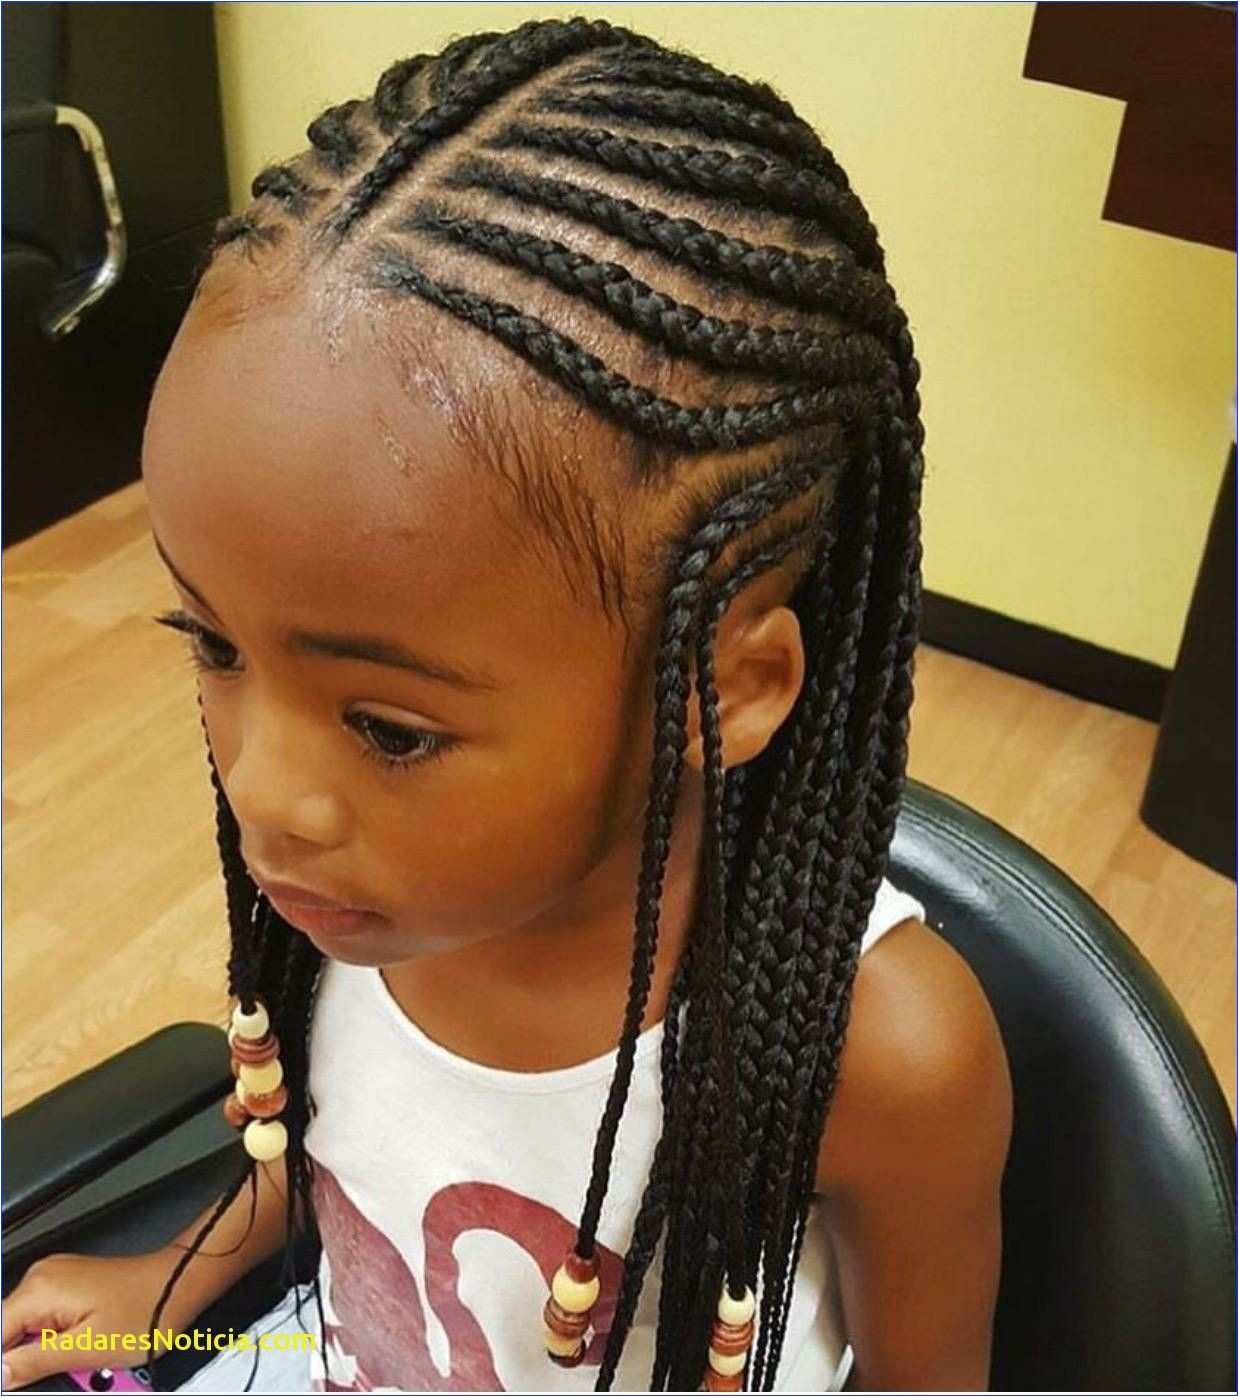 Kimgowerforcongress · List Girl Hairstyles Best Cornrow Ponytail With Hair Weave 5 List Braided Ponytail Hairstyles